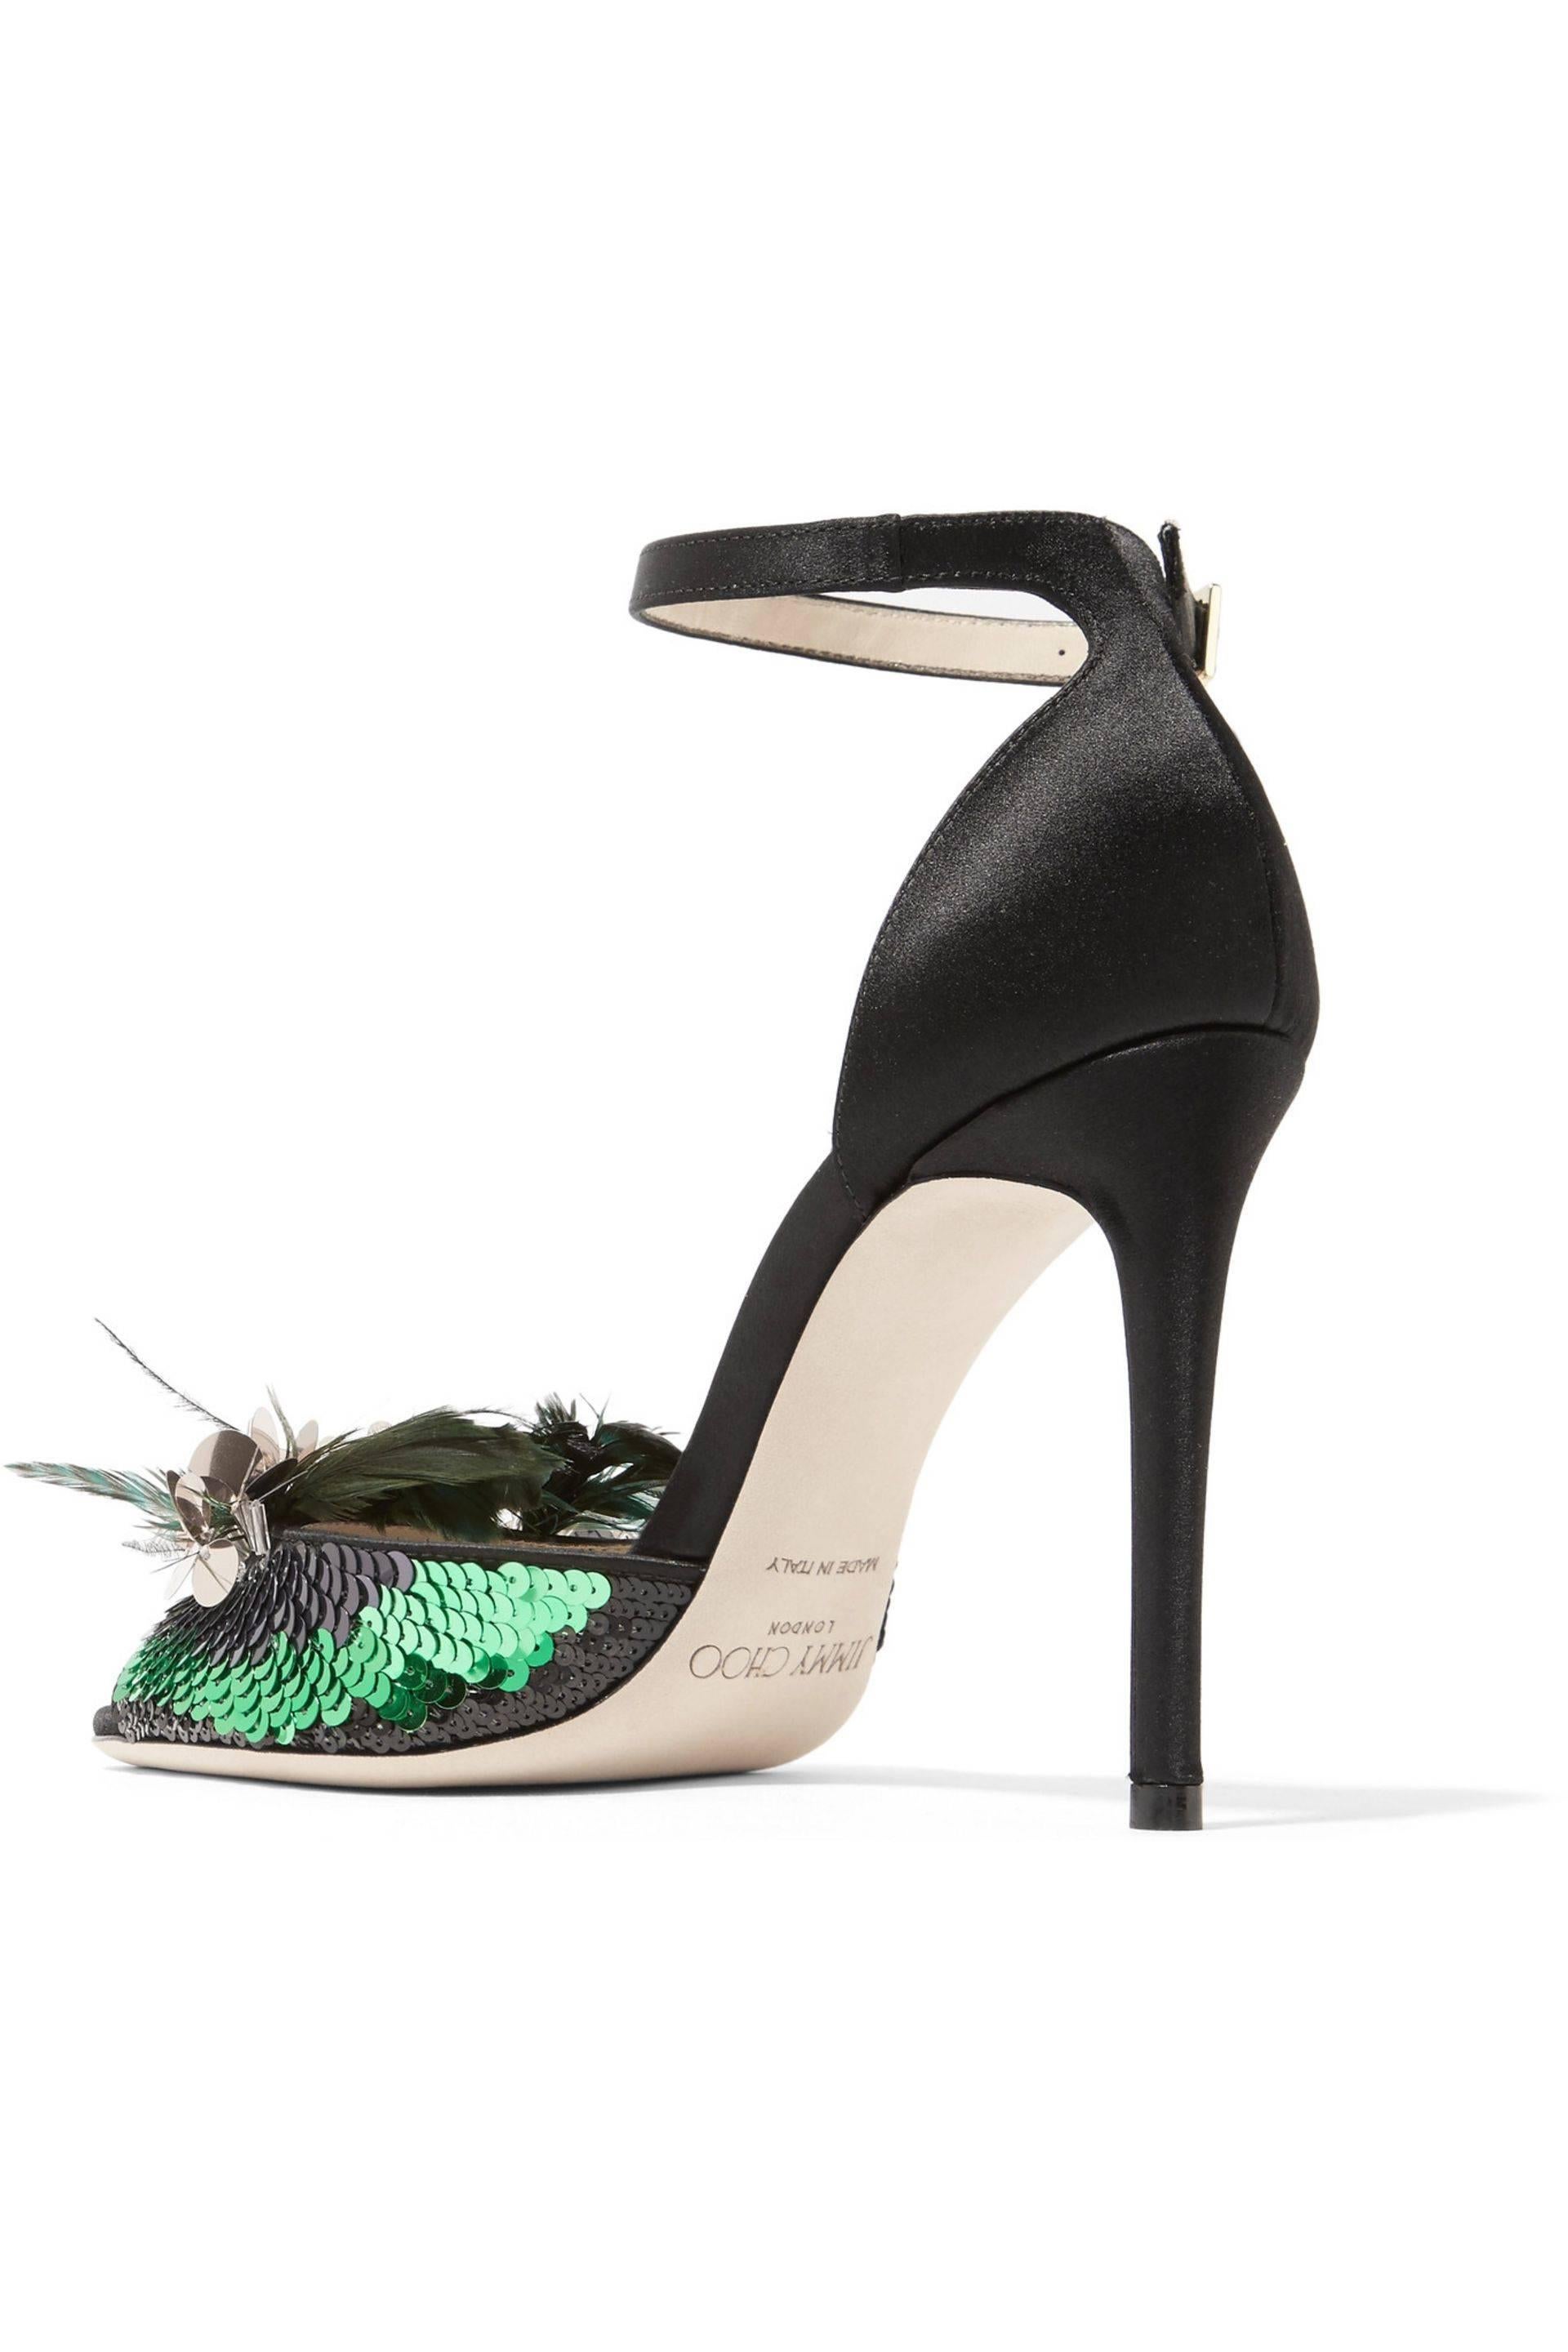 Jimmy Choo New Black Green Ostrich Sequin Evening Sandals Heels in Box In New Condition In Chicago, IL